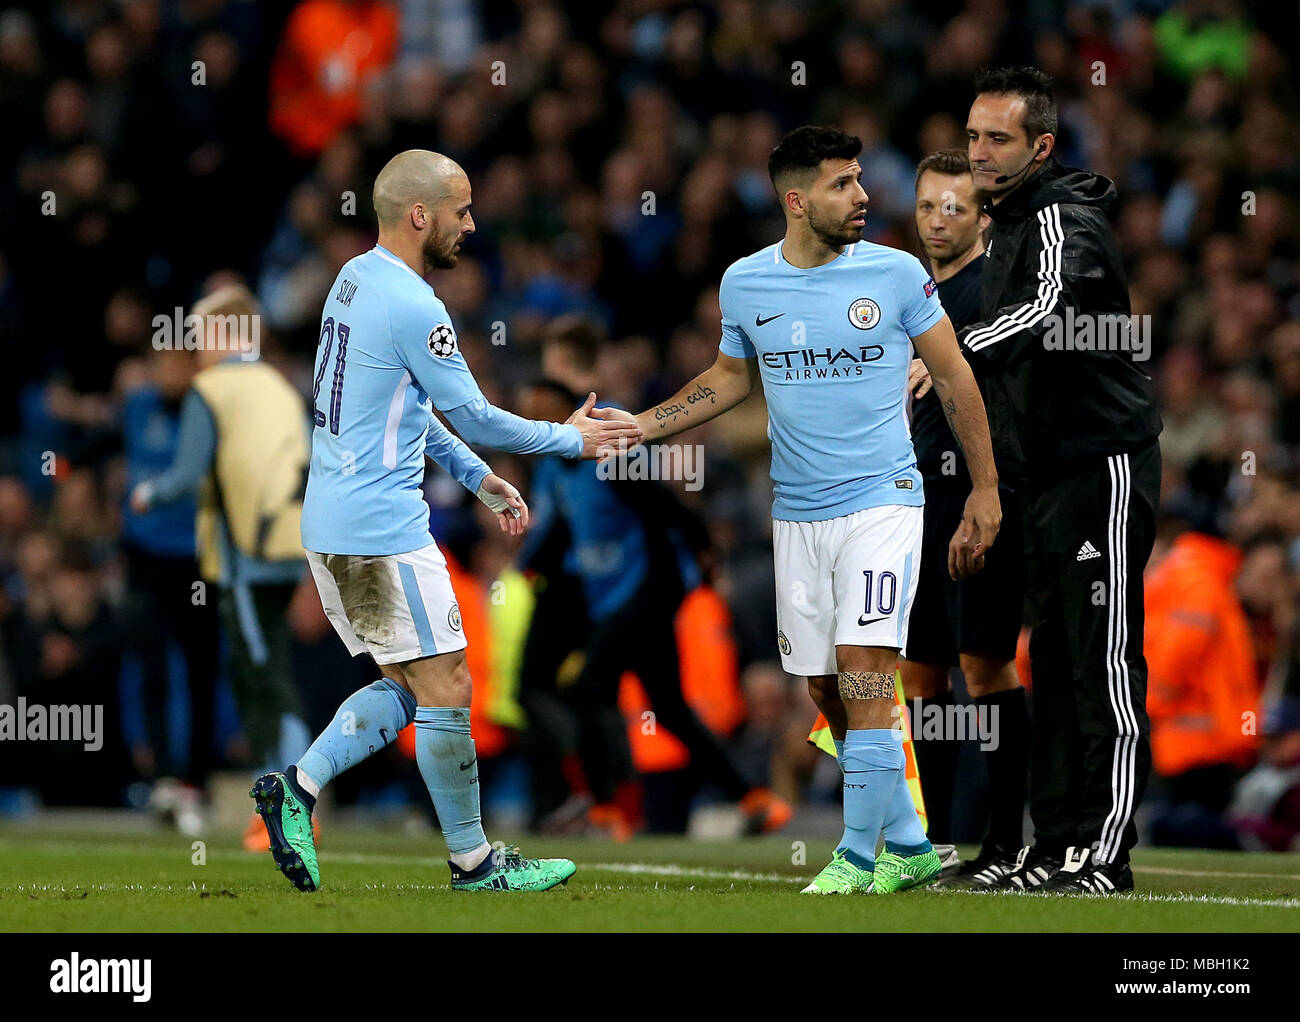 Manchester City's Sergio Aguero (centre) is substituted on for David Silva (left) during the UEFA Champions League, Quarter Final at the Etihad Stadium, Manchester. Stock Photo